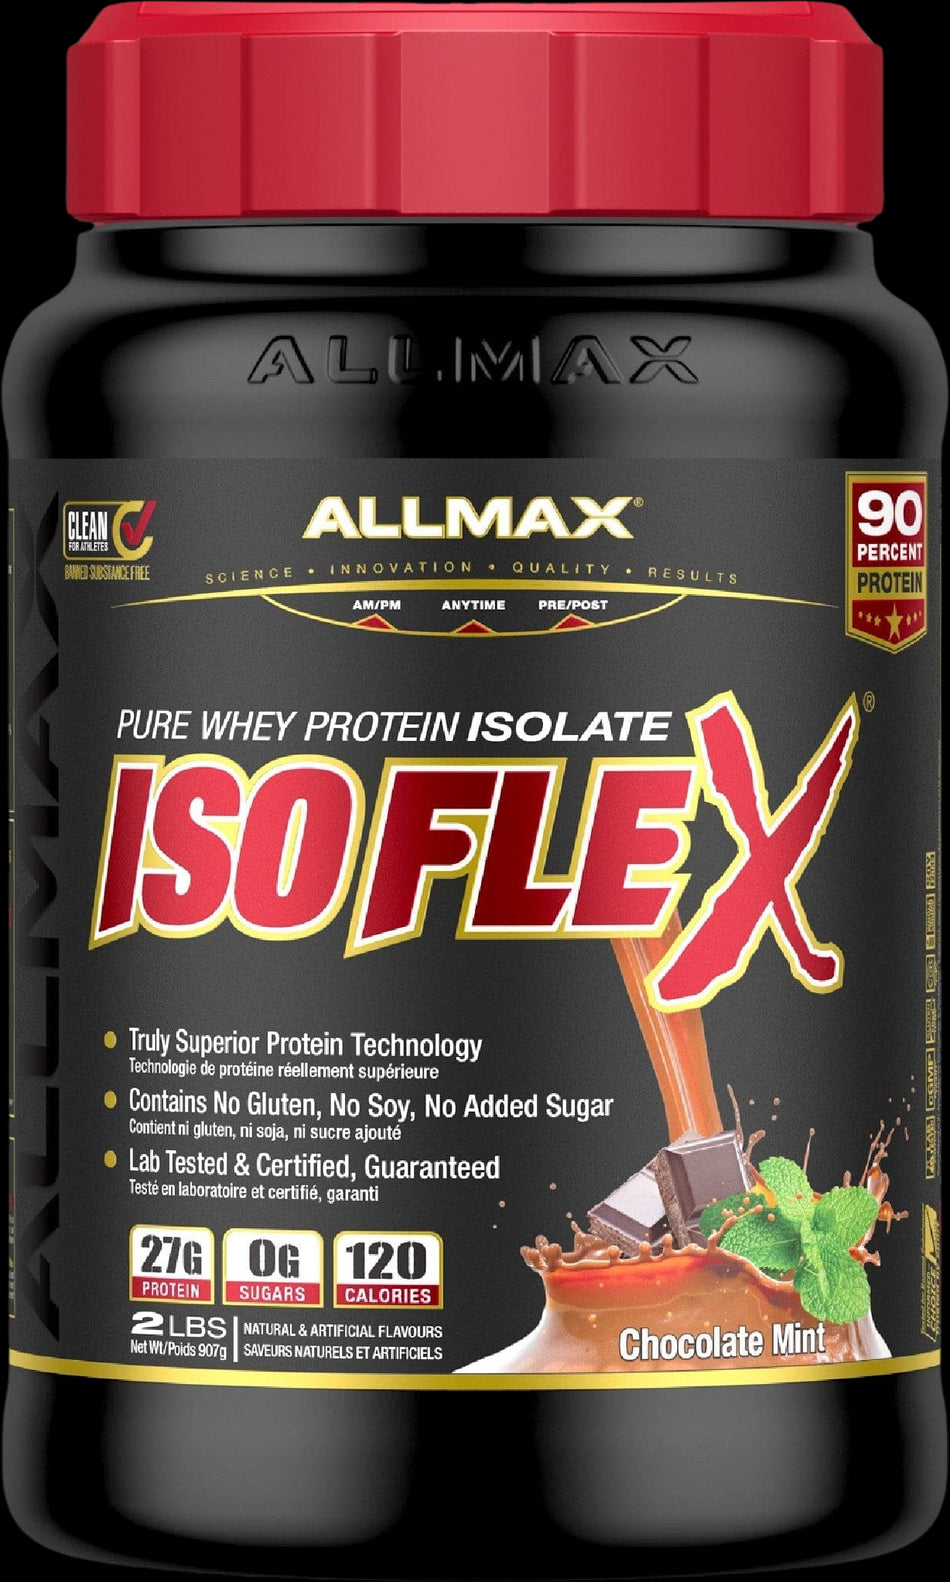 IsoFlex | Pure Whey Isolate ~ Truly Superior Protein Technology